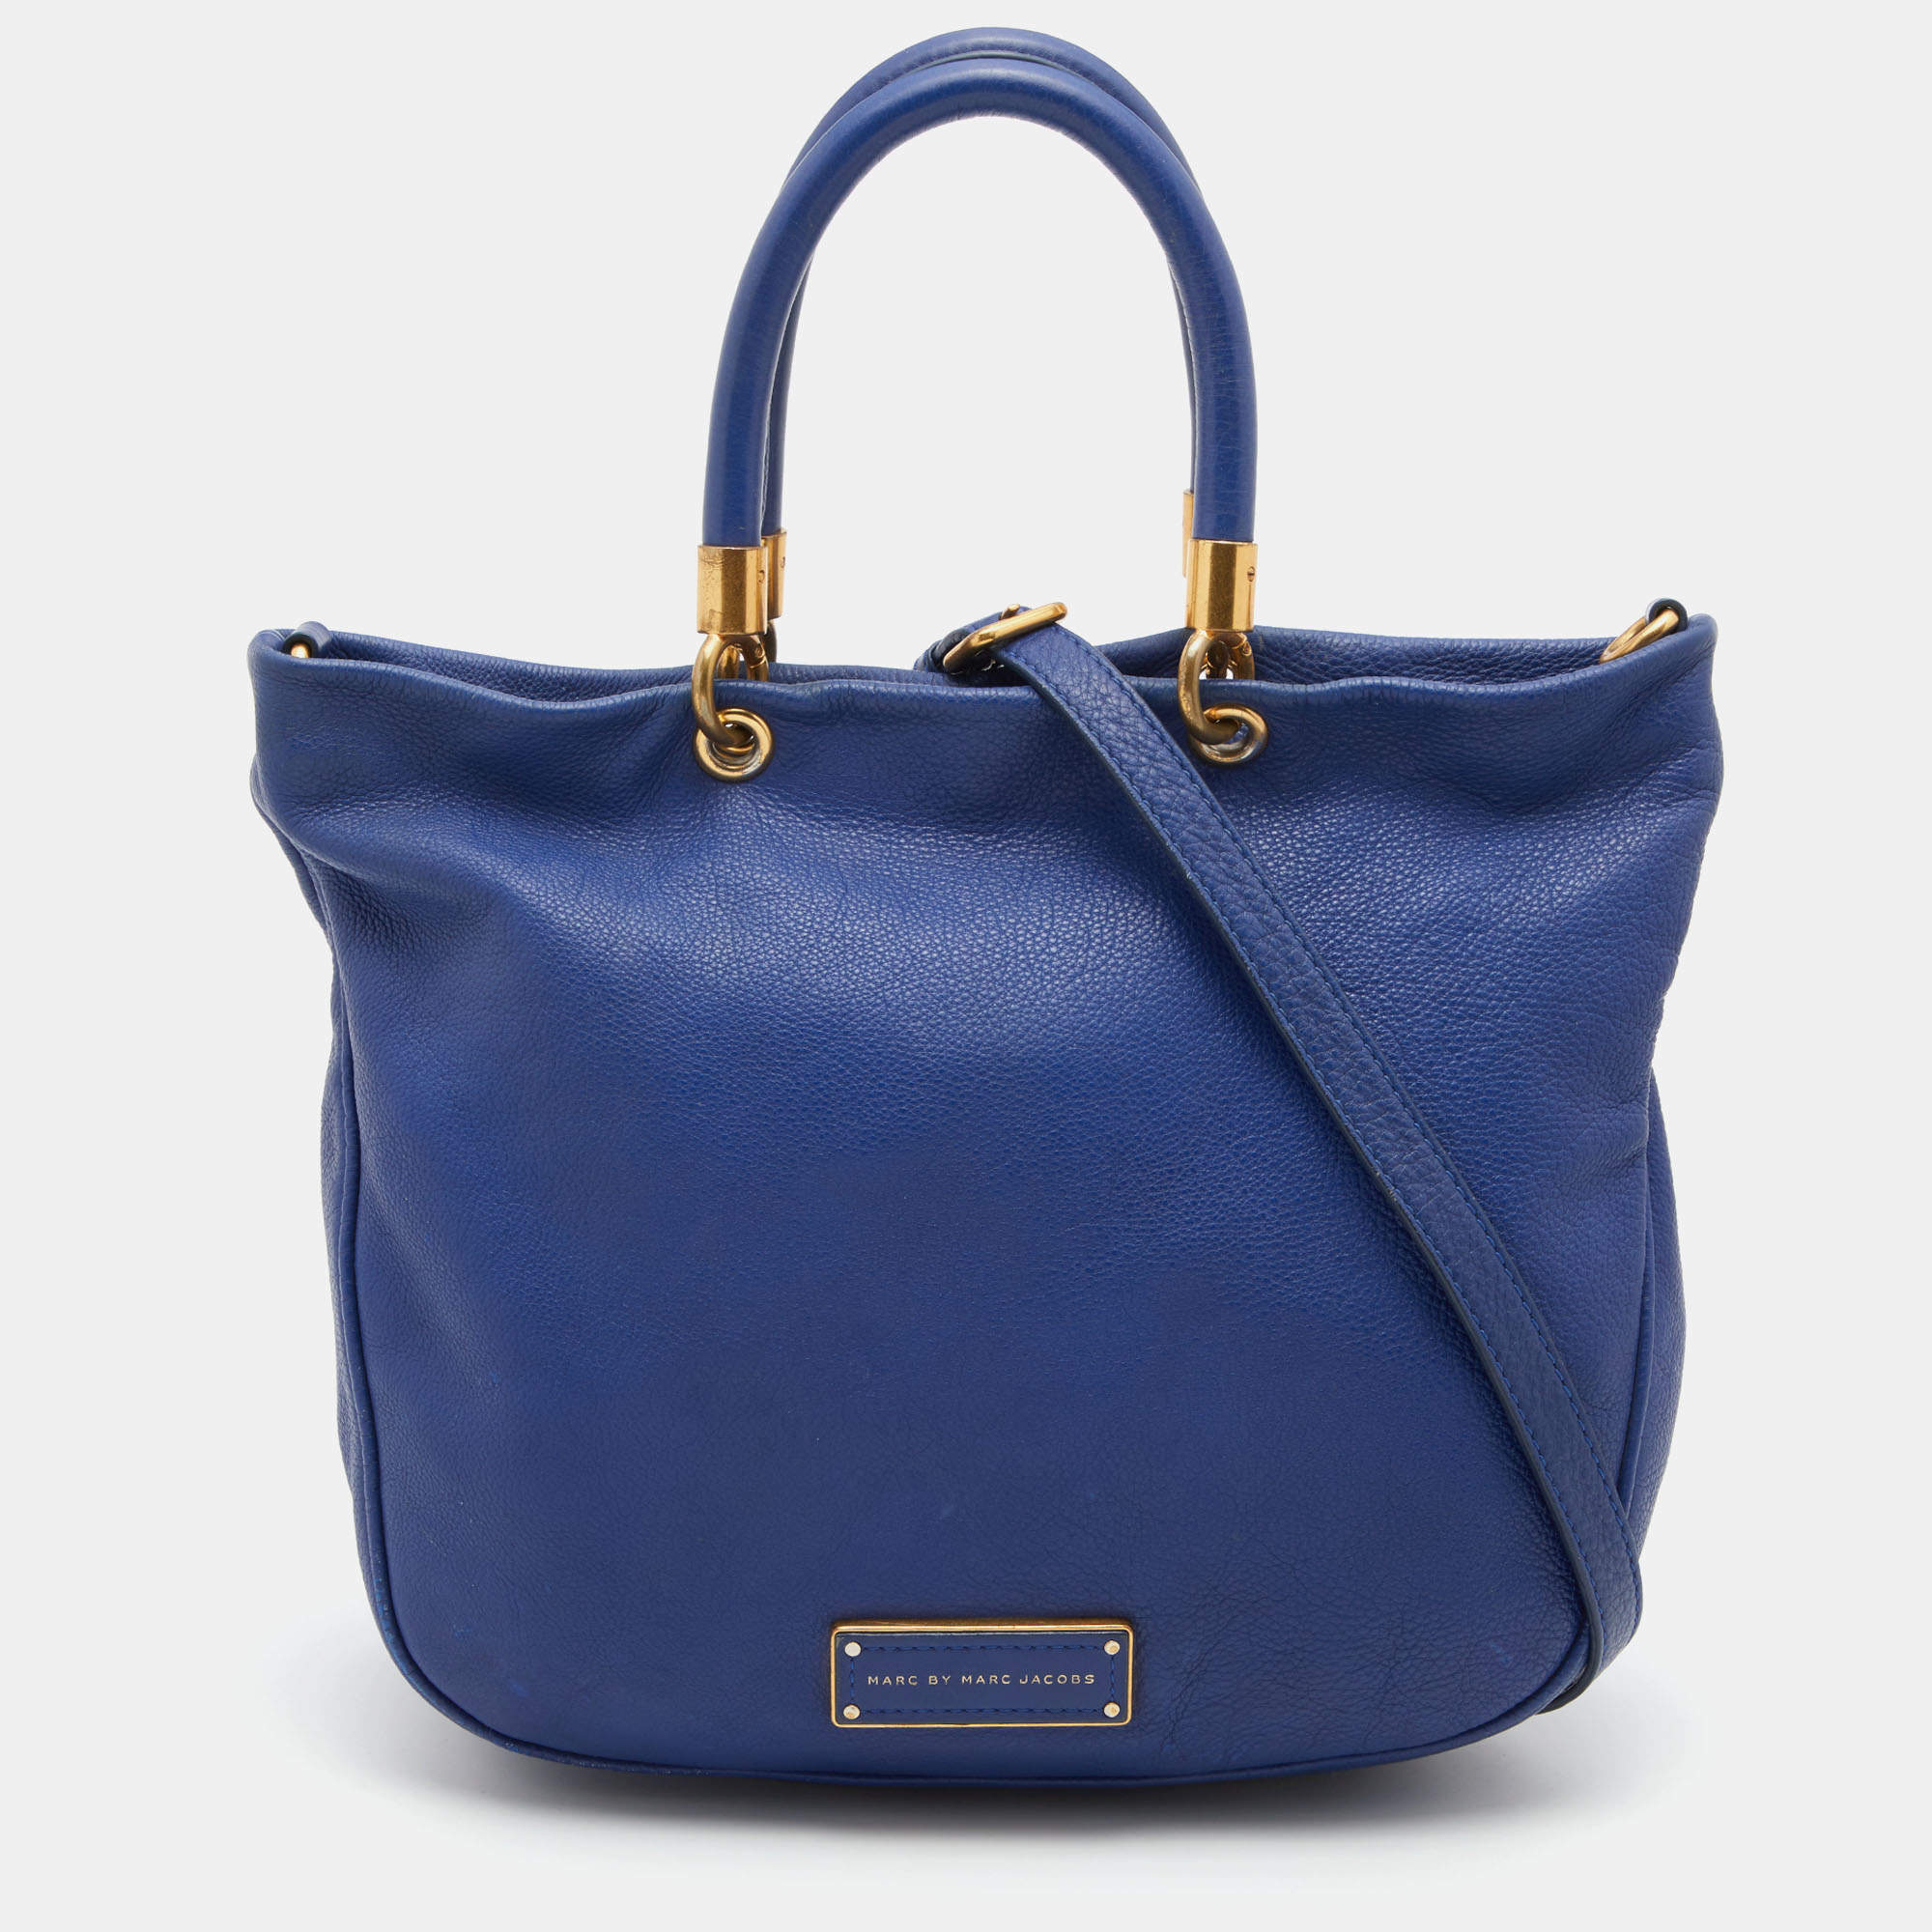 Marc by Marc Jacobs Blue Leather Too Hot to Handle Tote